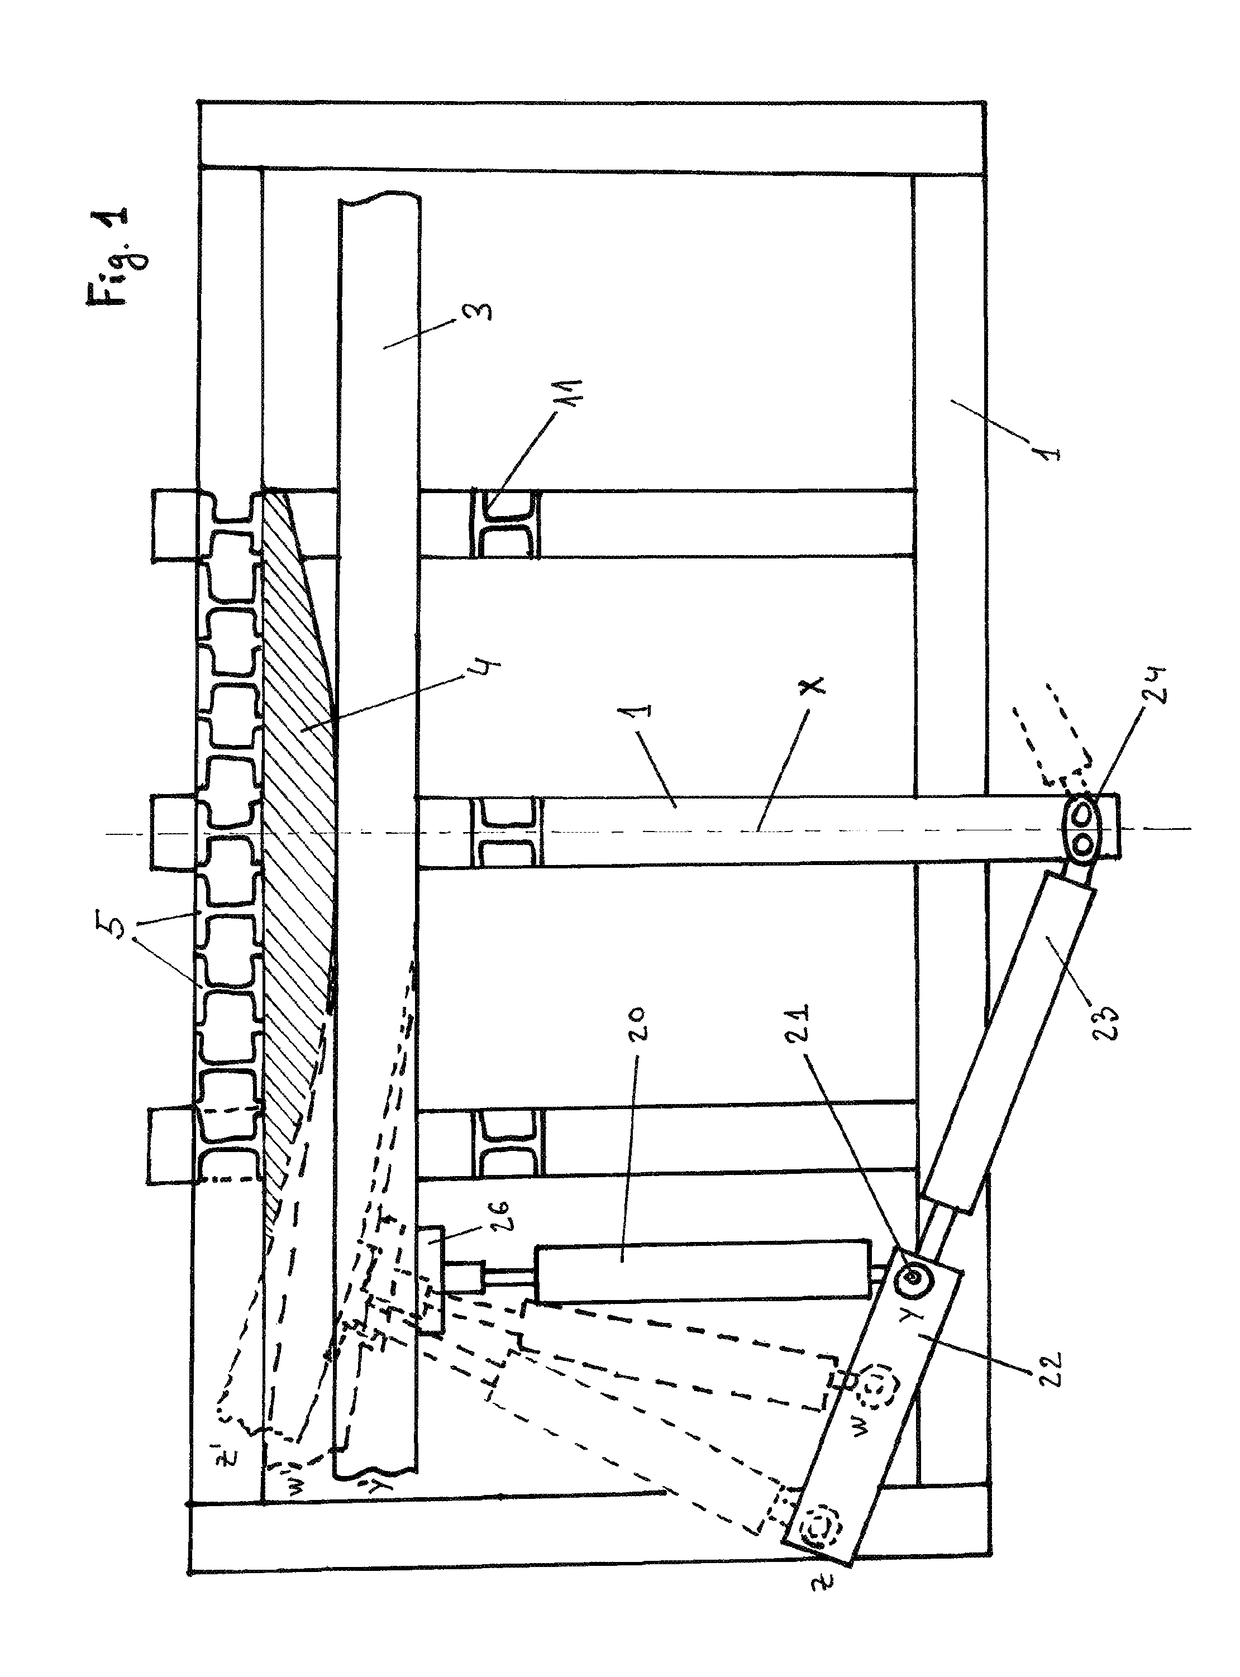 Machine and method for the semi-continuous cold-bending of sections with low ductility